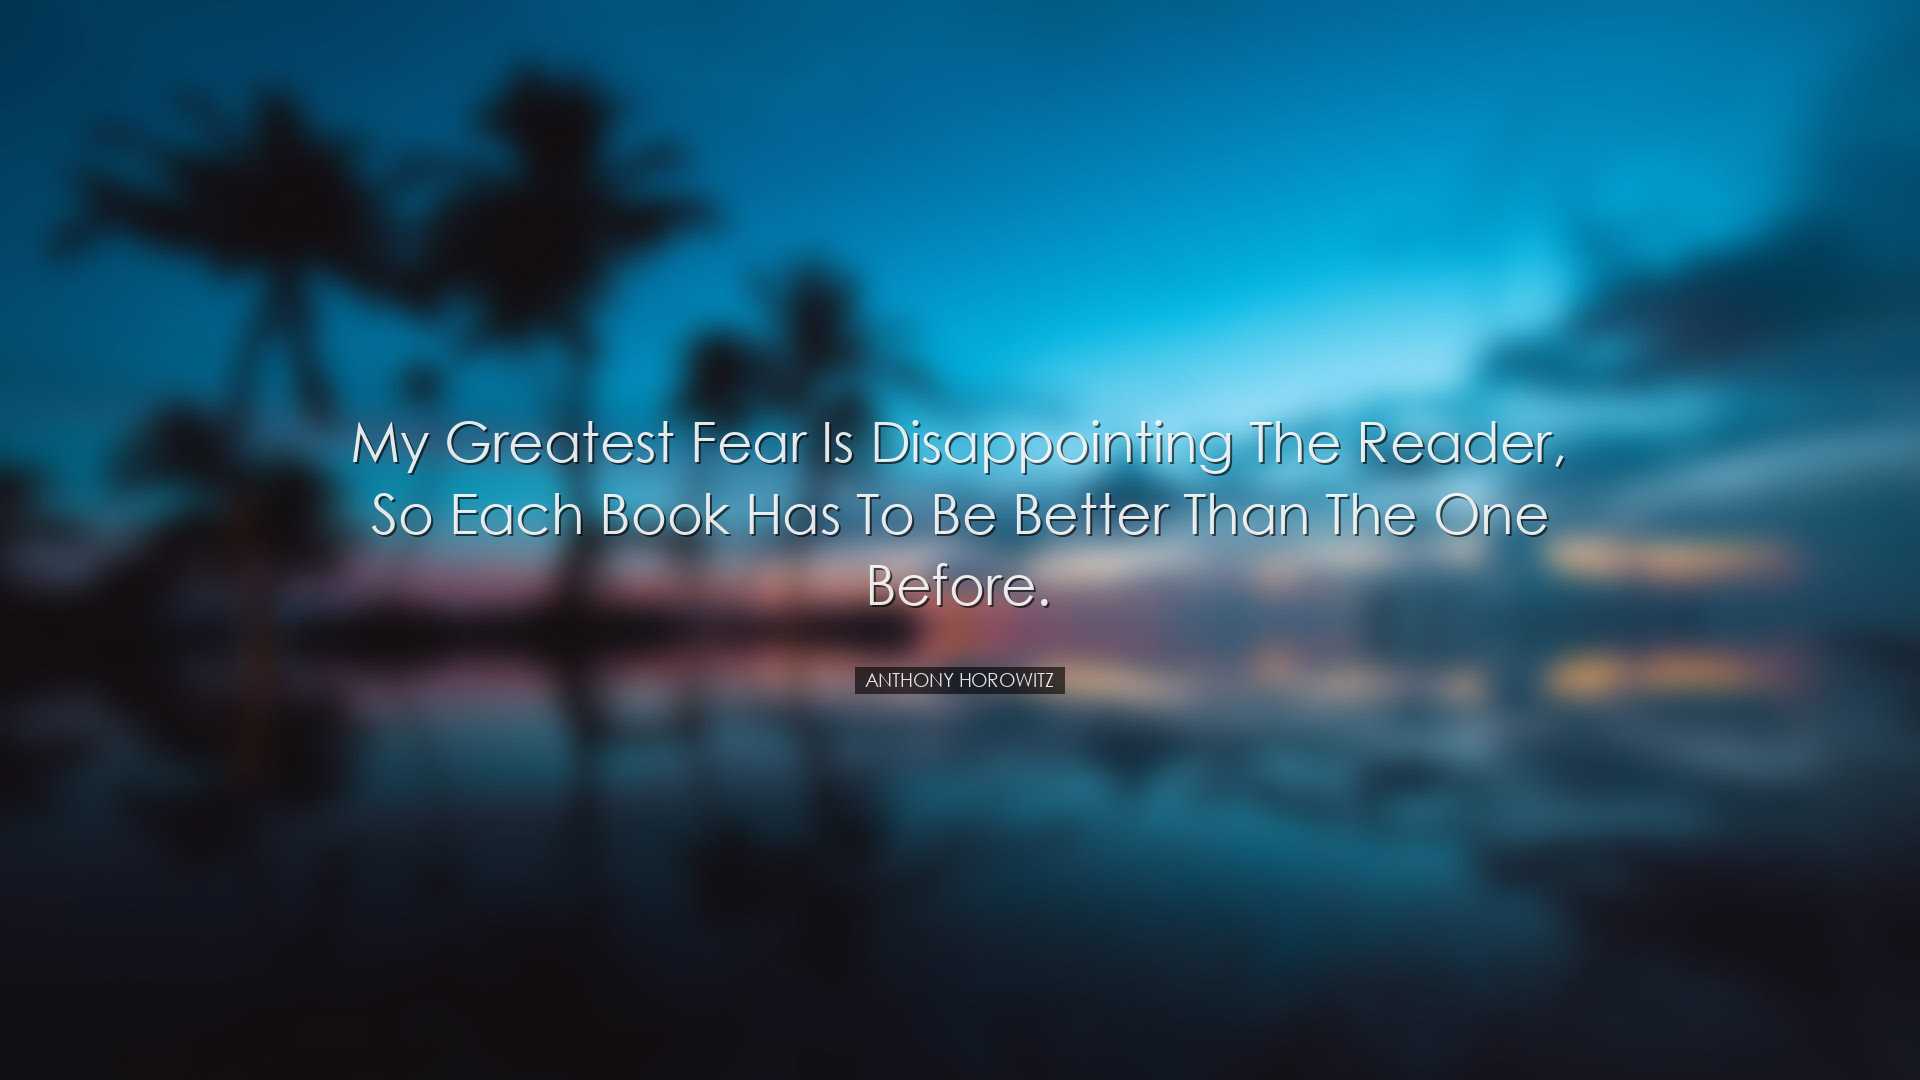 My greatest fear is disappointing the reader, so each book has to